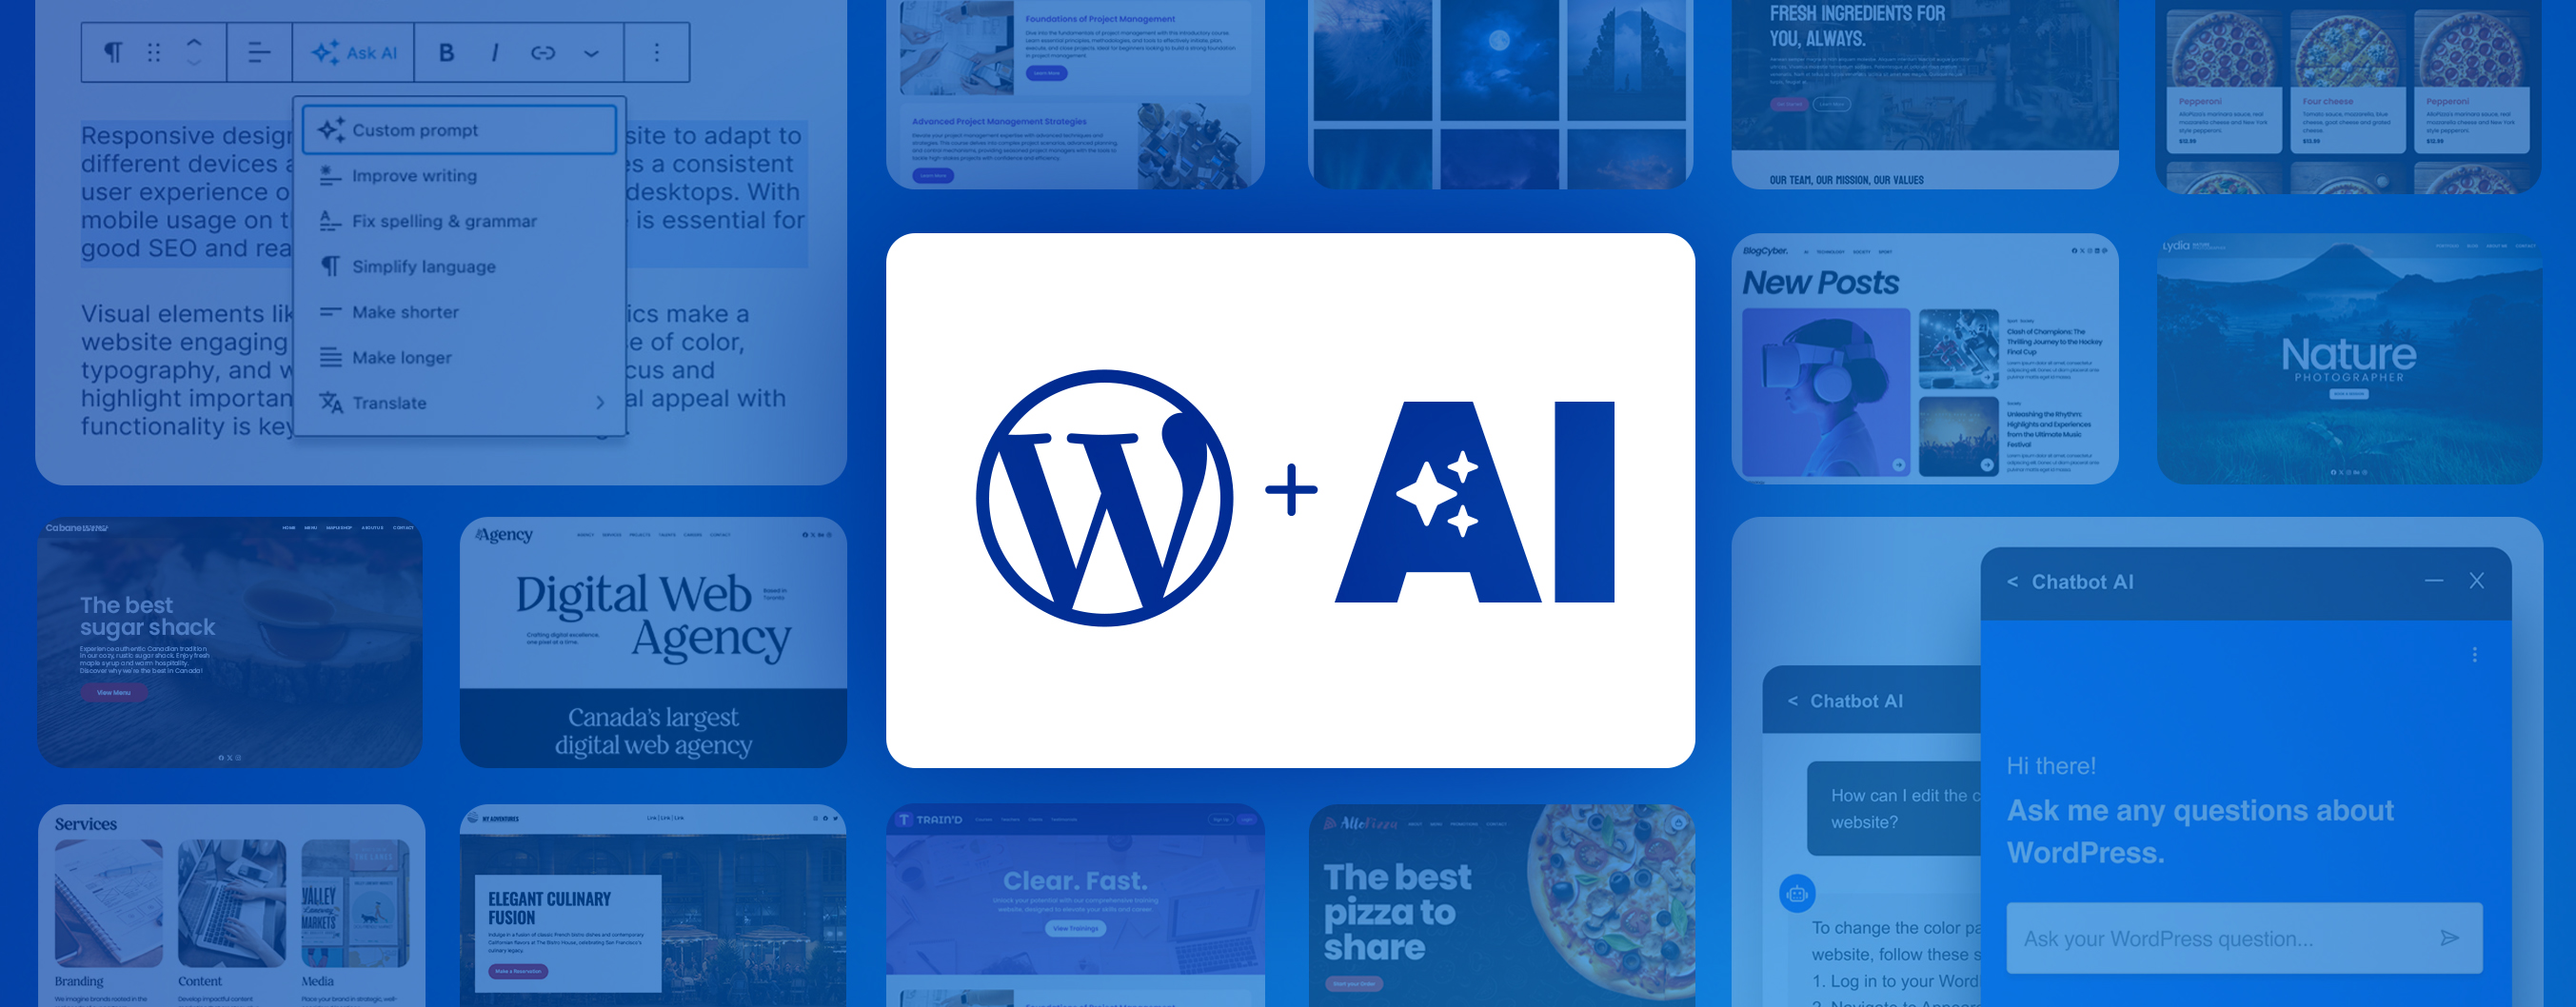 WordPress logo + AI to announce the launch of AI-powered WordPress at Web Hosting Canada